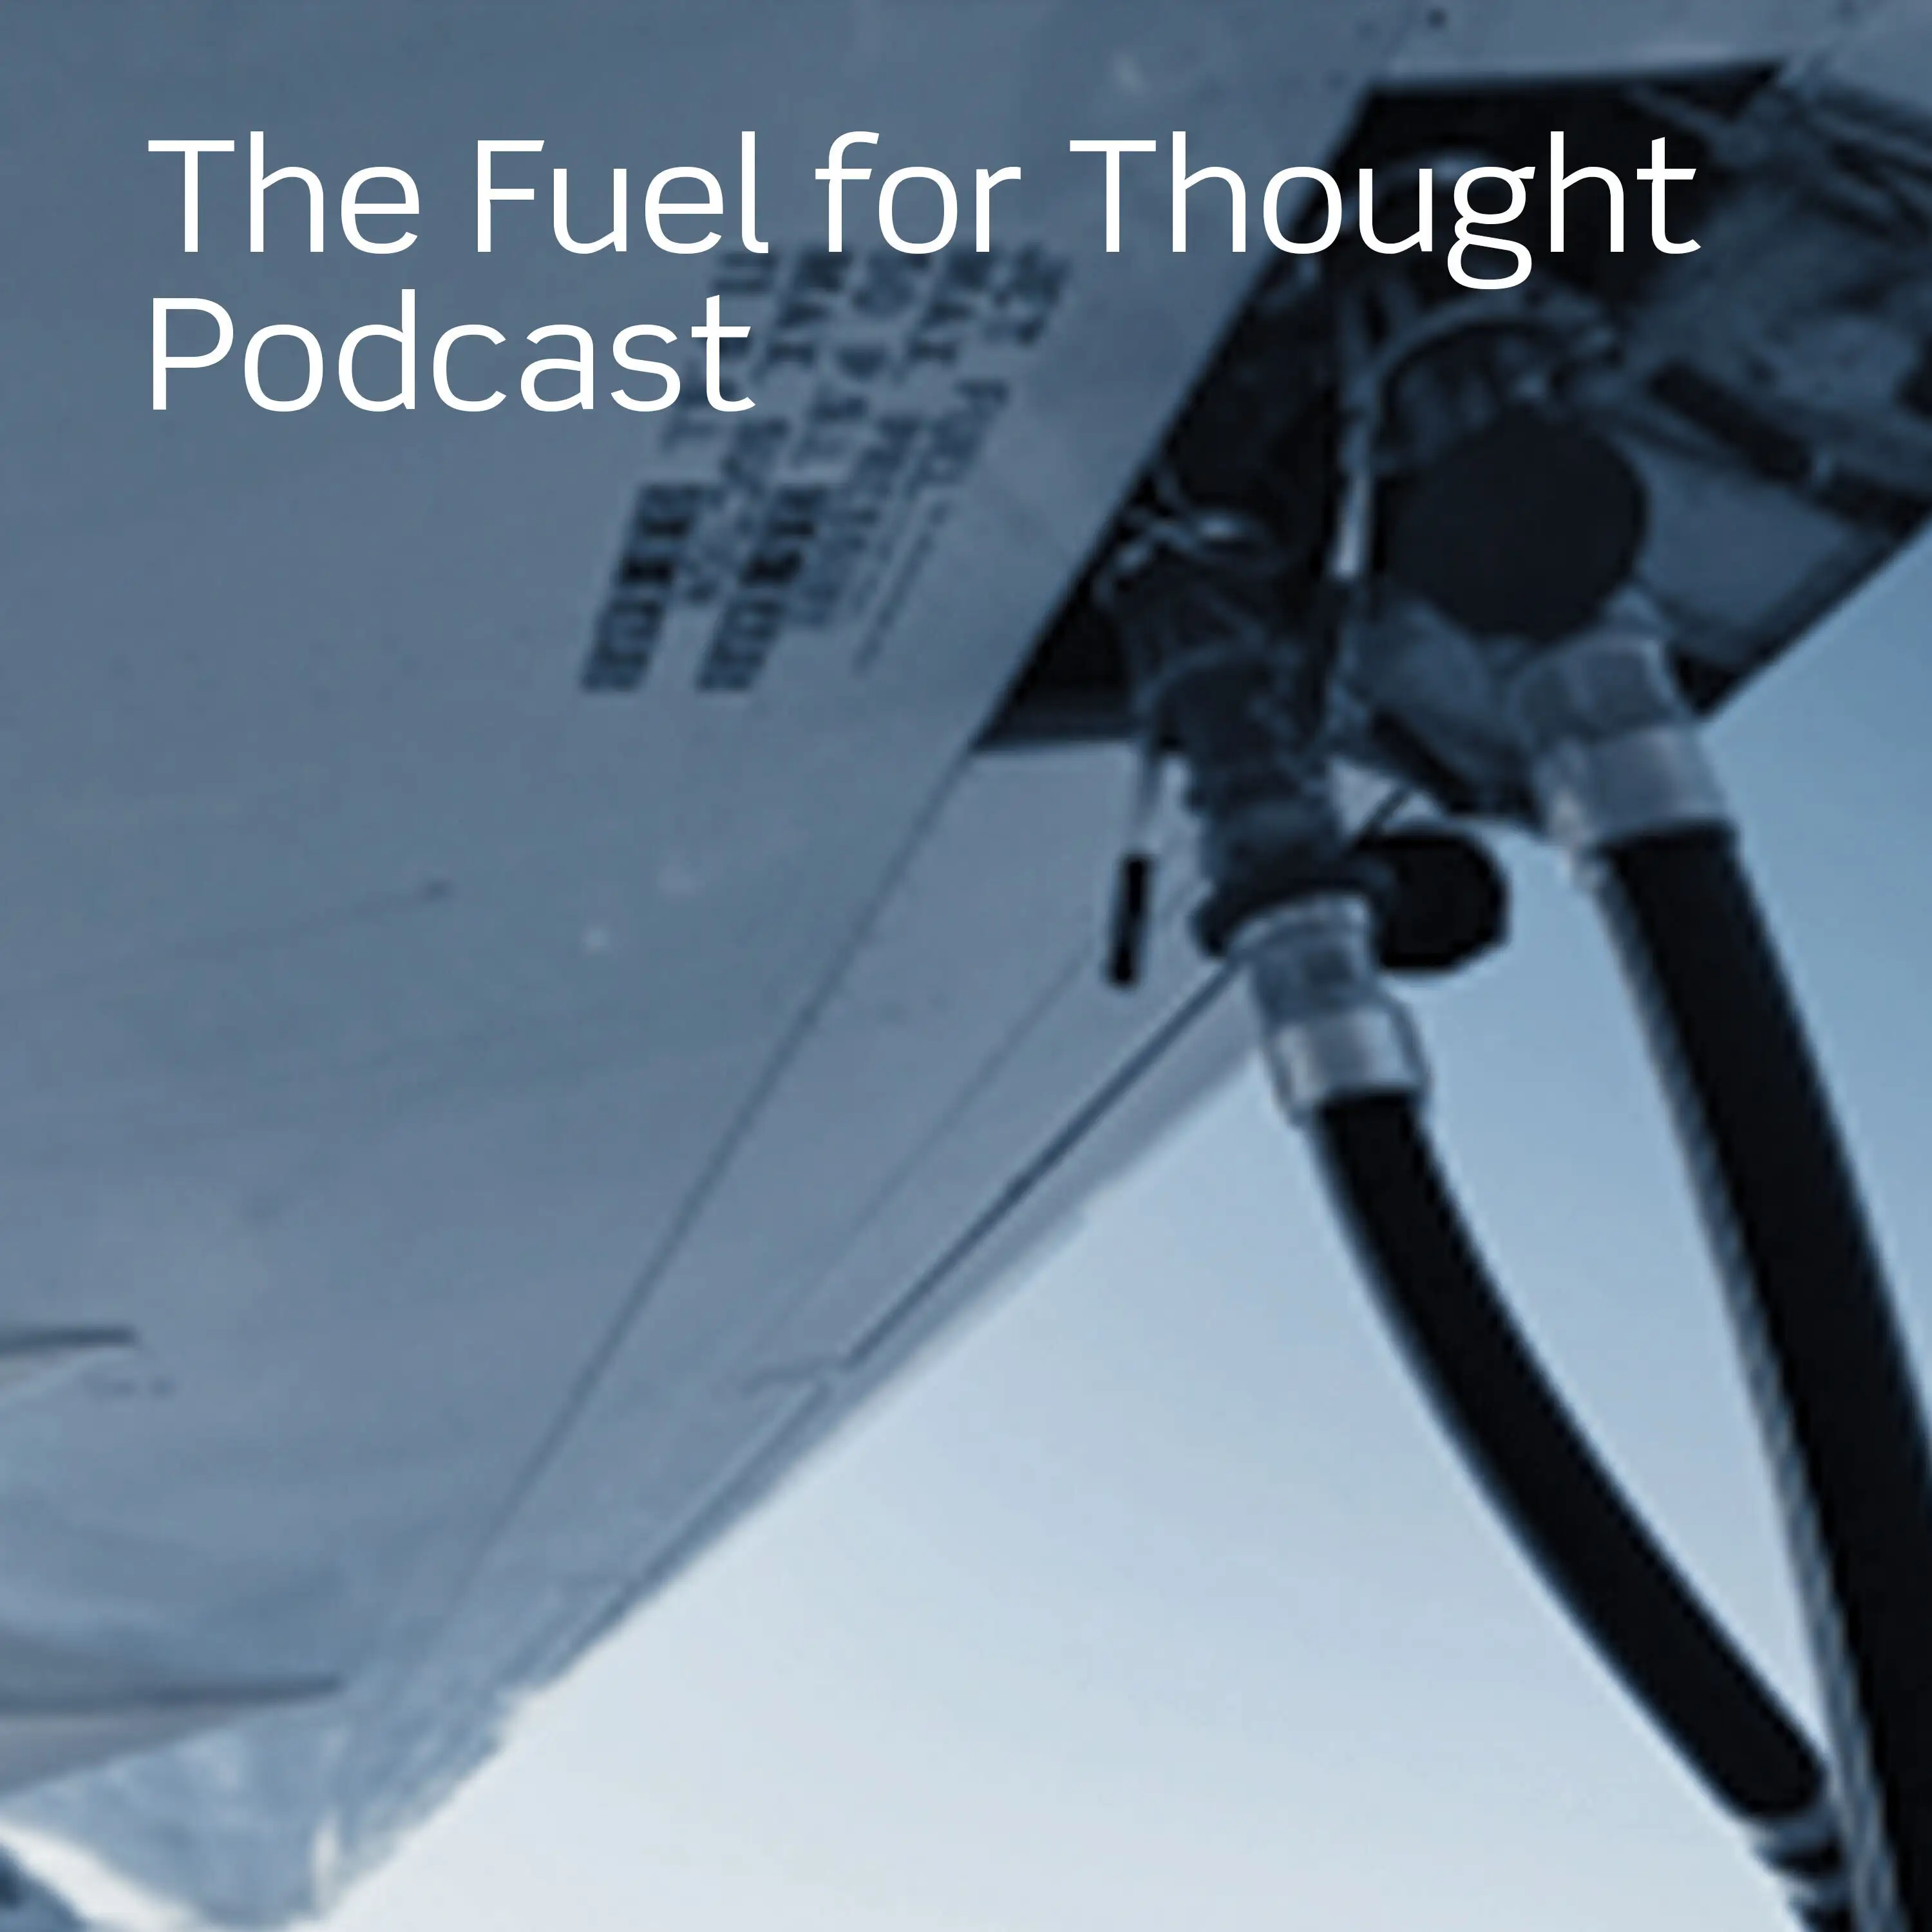 How to make a business out of sustainable aviation fuel